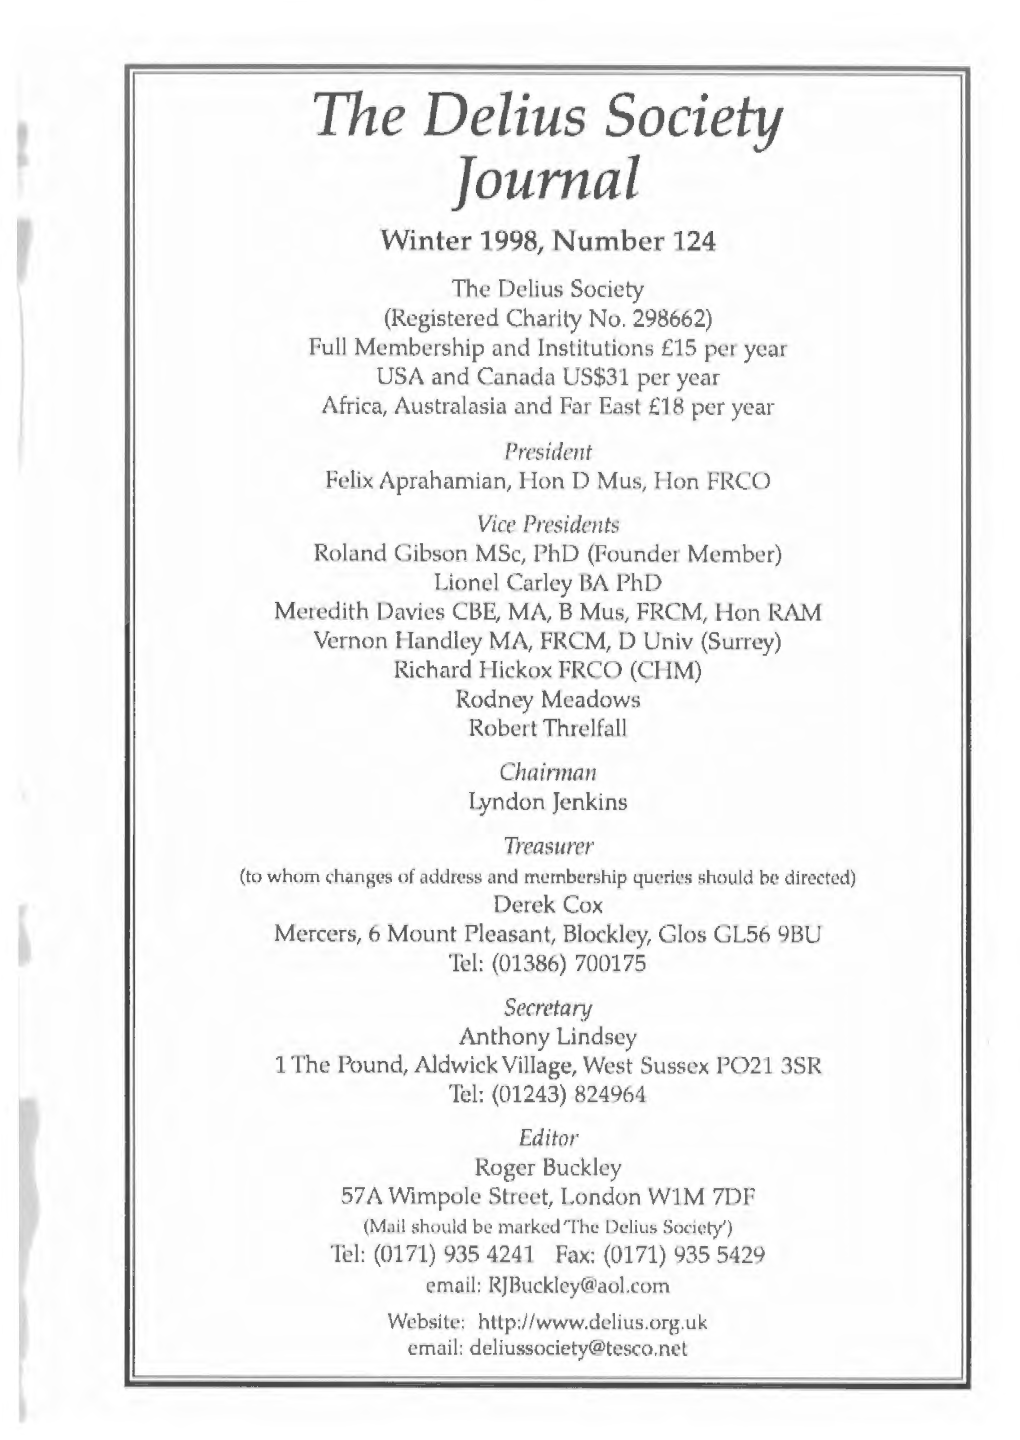 The Delius Society Journal No 61(October1978), That the Present Notes Refer; Not to the Later Series of Recordings for Which the Same Title Was Appropriately Borrowed